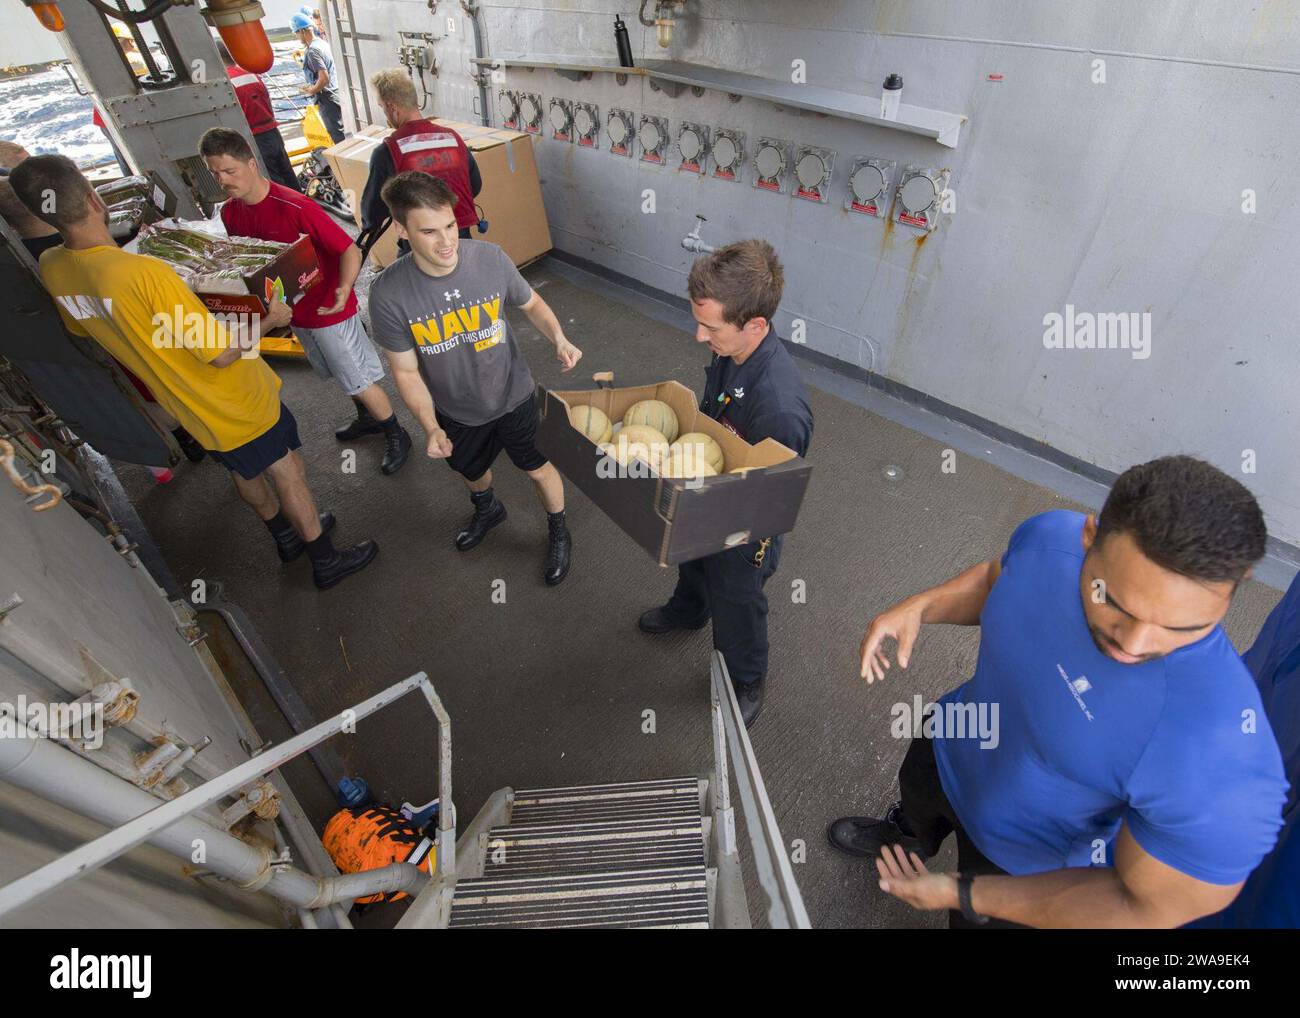 US military forces. 180707IC246-0122 MEDITERRANEAN SEA (July 7, 2018) Sailors aboard guided-missile destroyer USS Arleigh Burke (DDG 51) form a working party to move stores. With the aircraft carrier USS Harry S. Truman (CVN 75) as the flagship, deploying strike group assists include staffs, ships, and aircraft of Carrier Strike Group (CSG) 8, Destroyer Squadron (DESRON) 28 and Carrier Air Wing (CVW) 1; as well as Sachen-class German Frigate FGS Hessen (F 221). (U.S. Navy photo by Mass Communication Specialist Seaman Raymond Maddocks/Released) Stock Photo